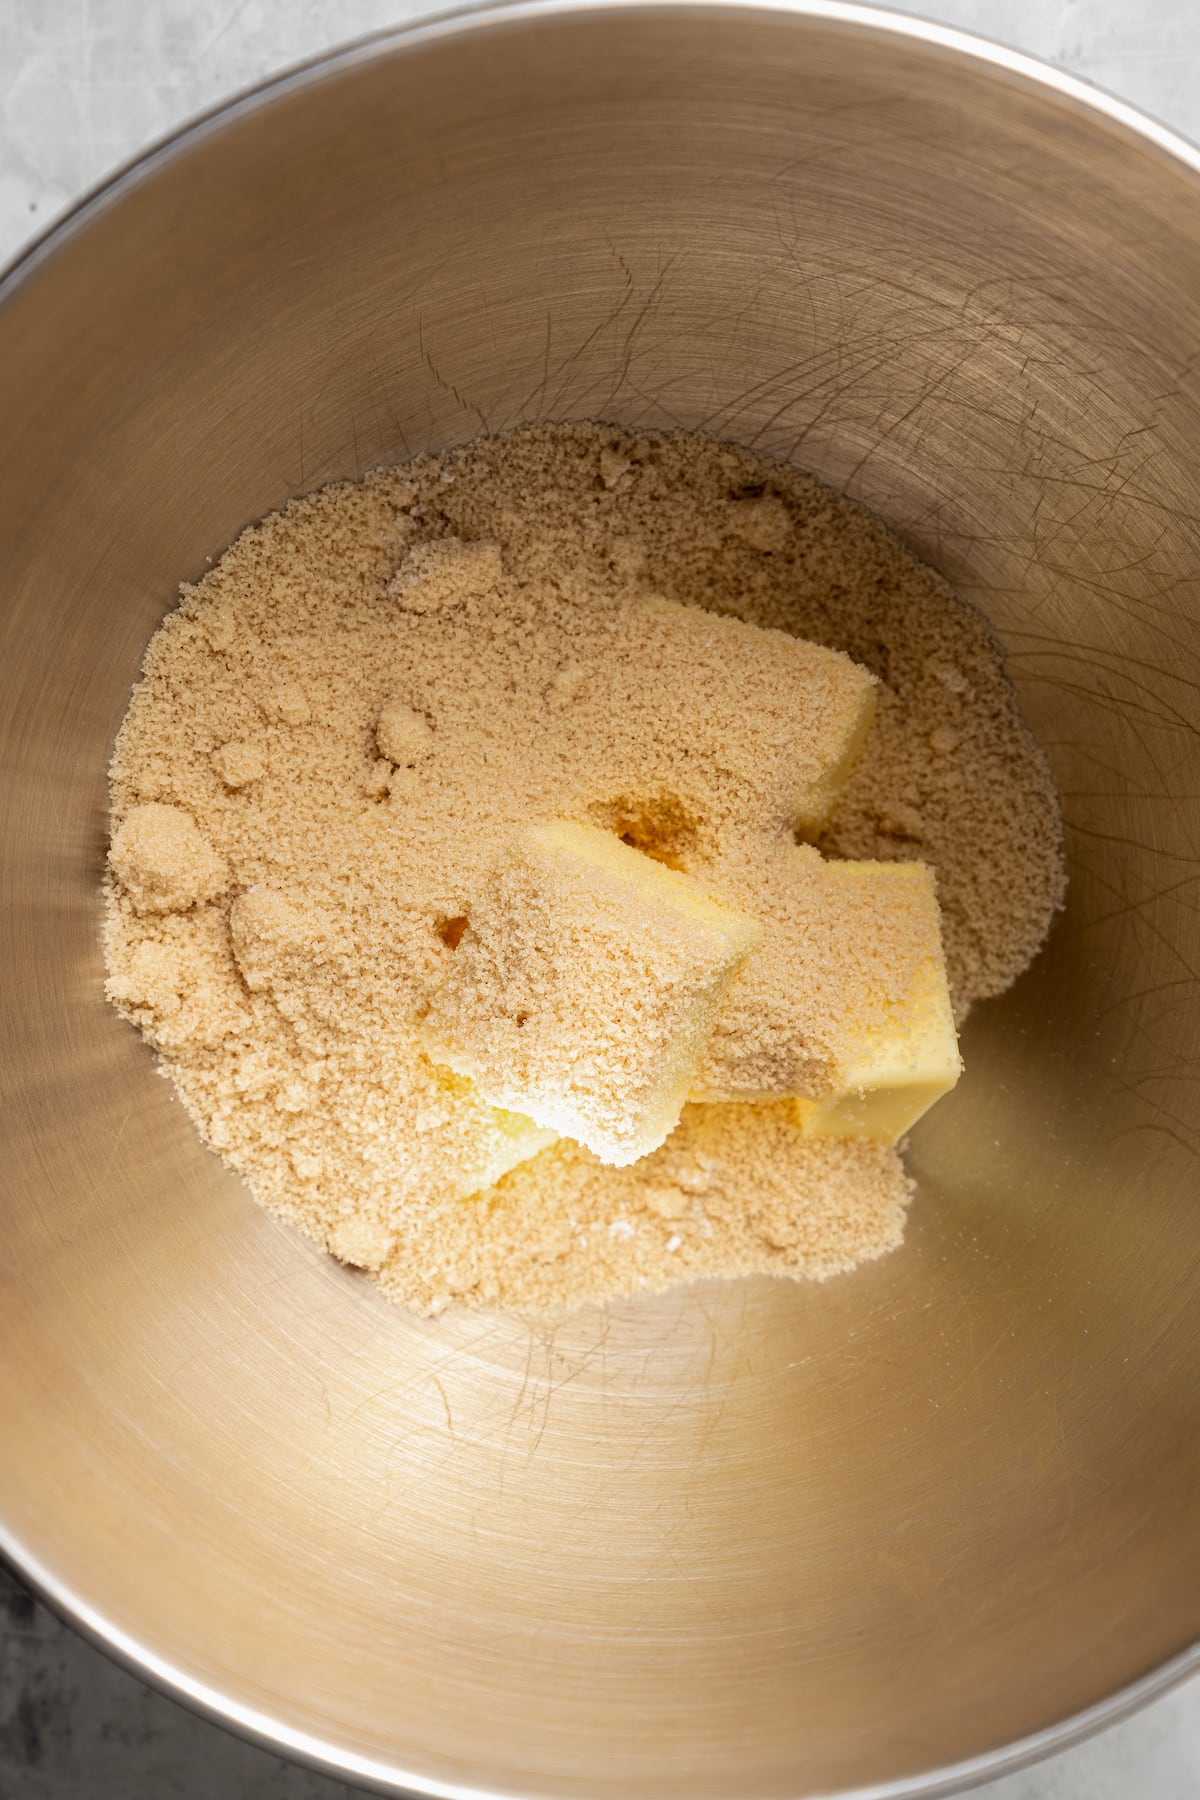 Combining butter and brown sugar in a bowl.